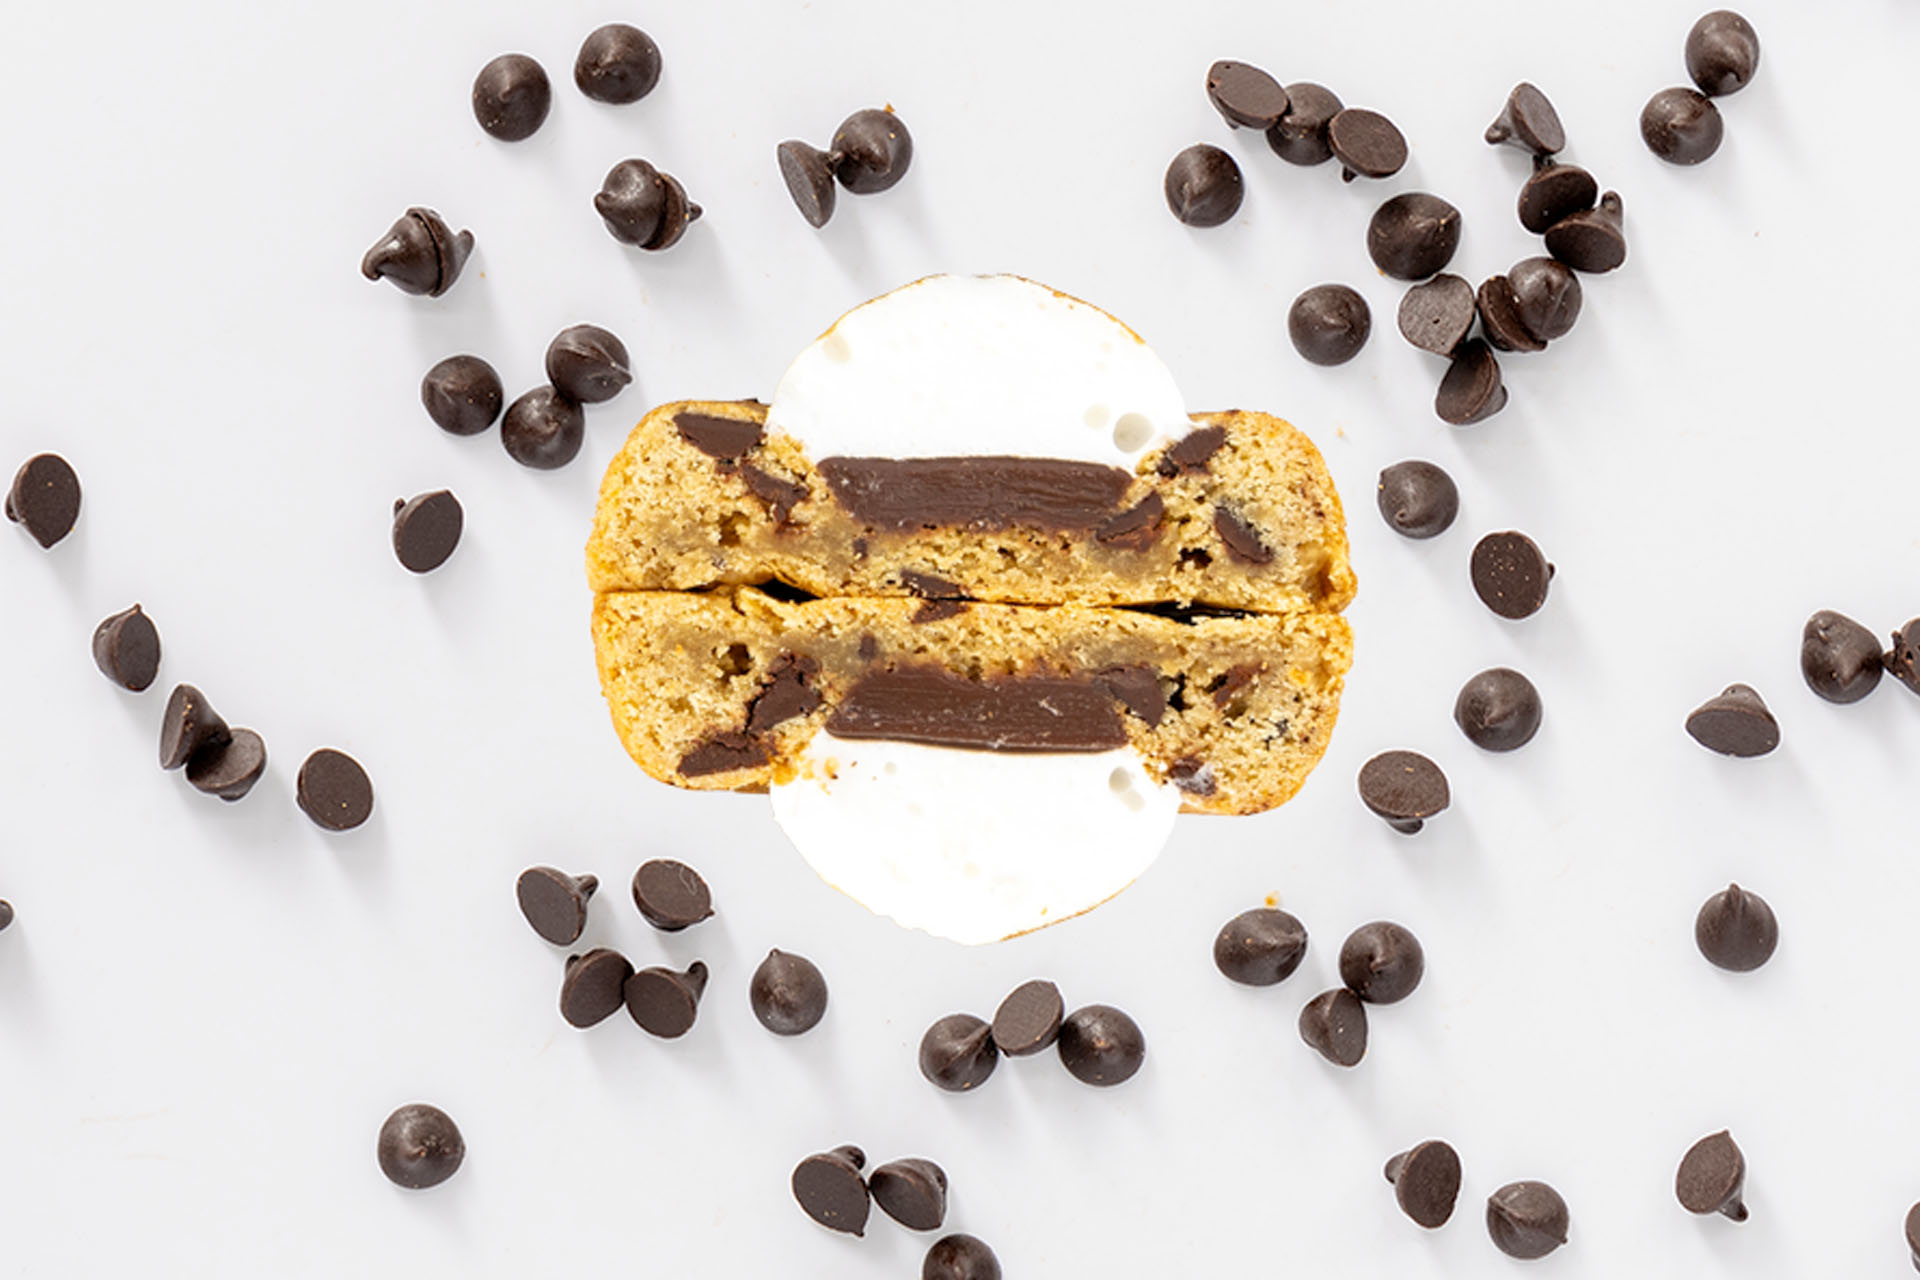 A chocolate chip cookie and espresso ice cream sandwich cut in half, surrounded by scattered chocolate chips on a white surface.